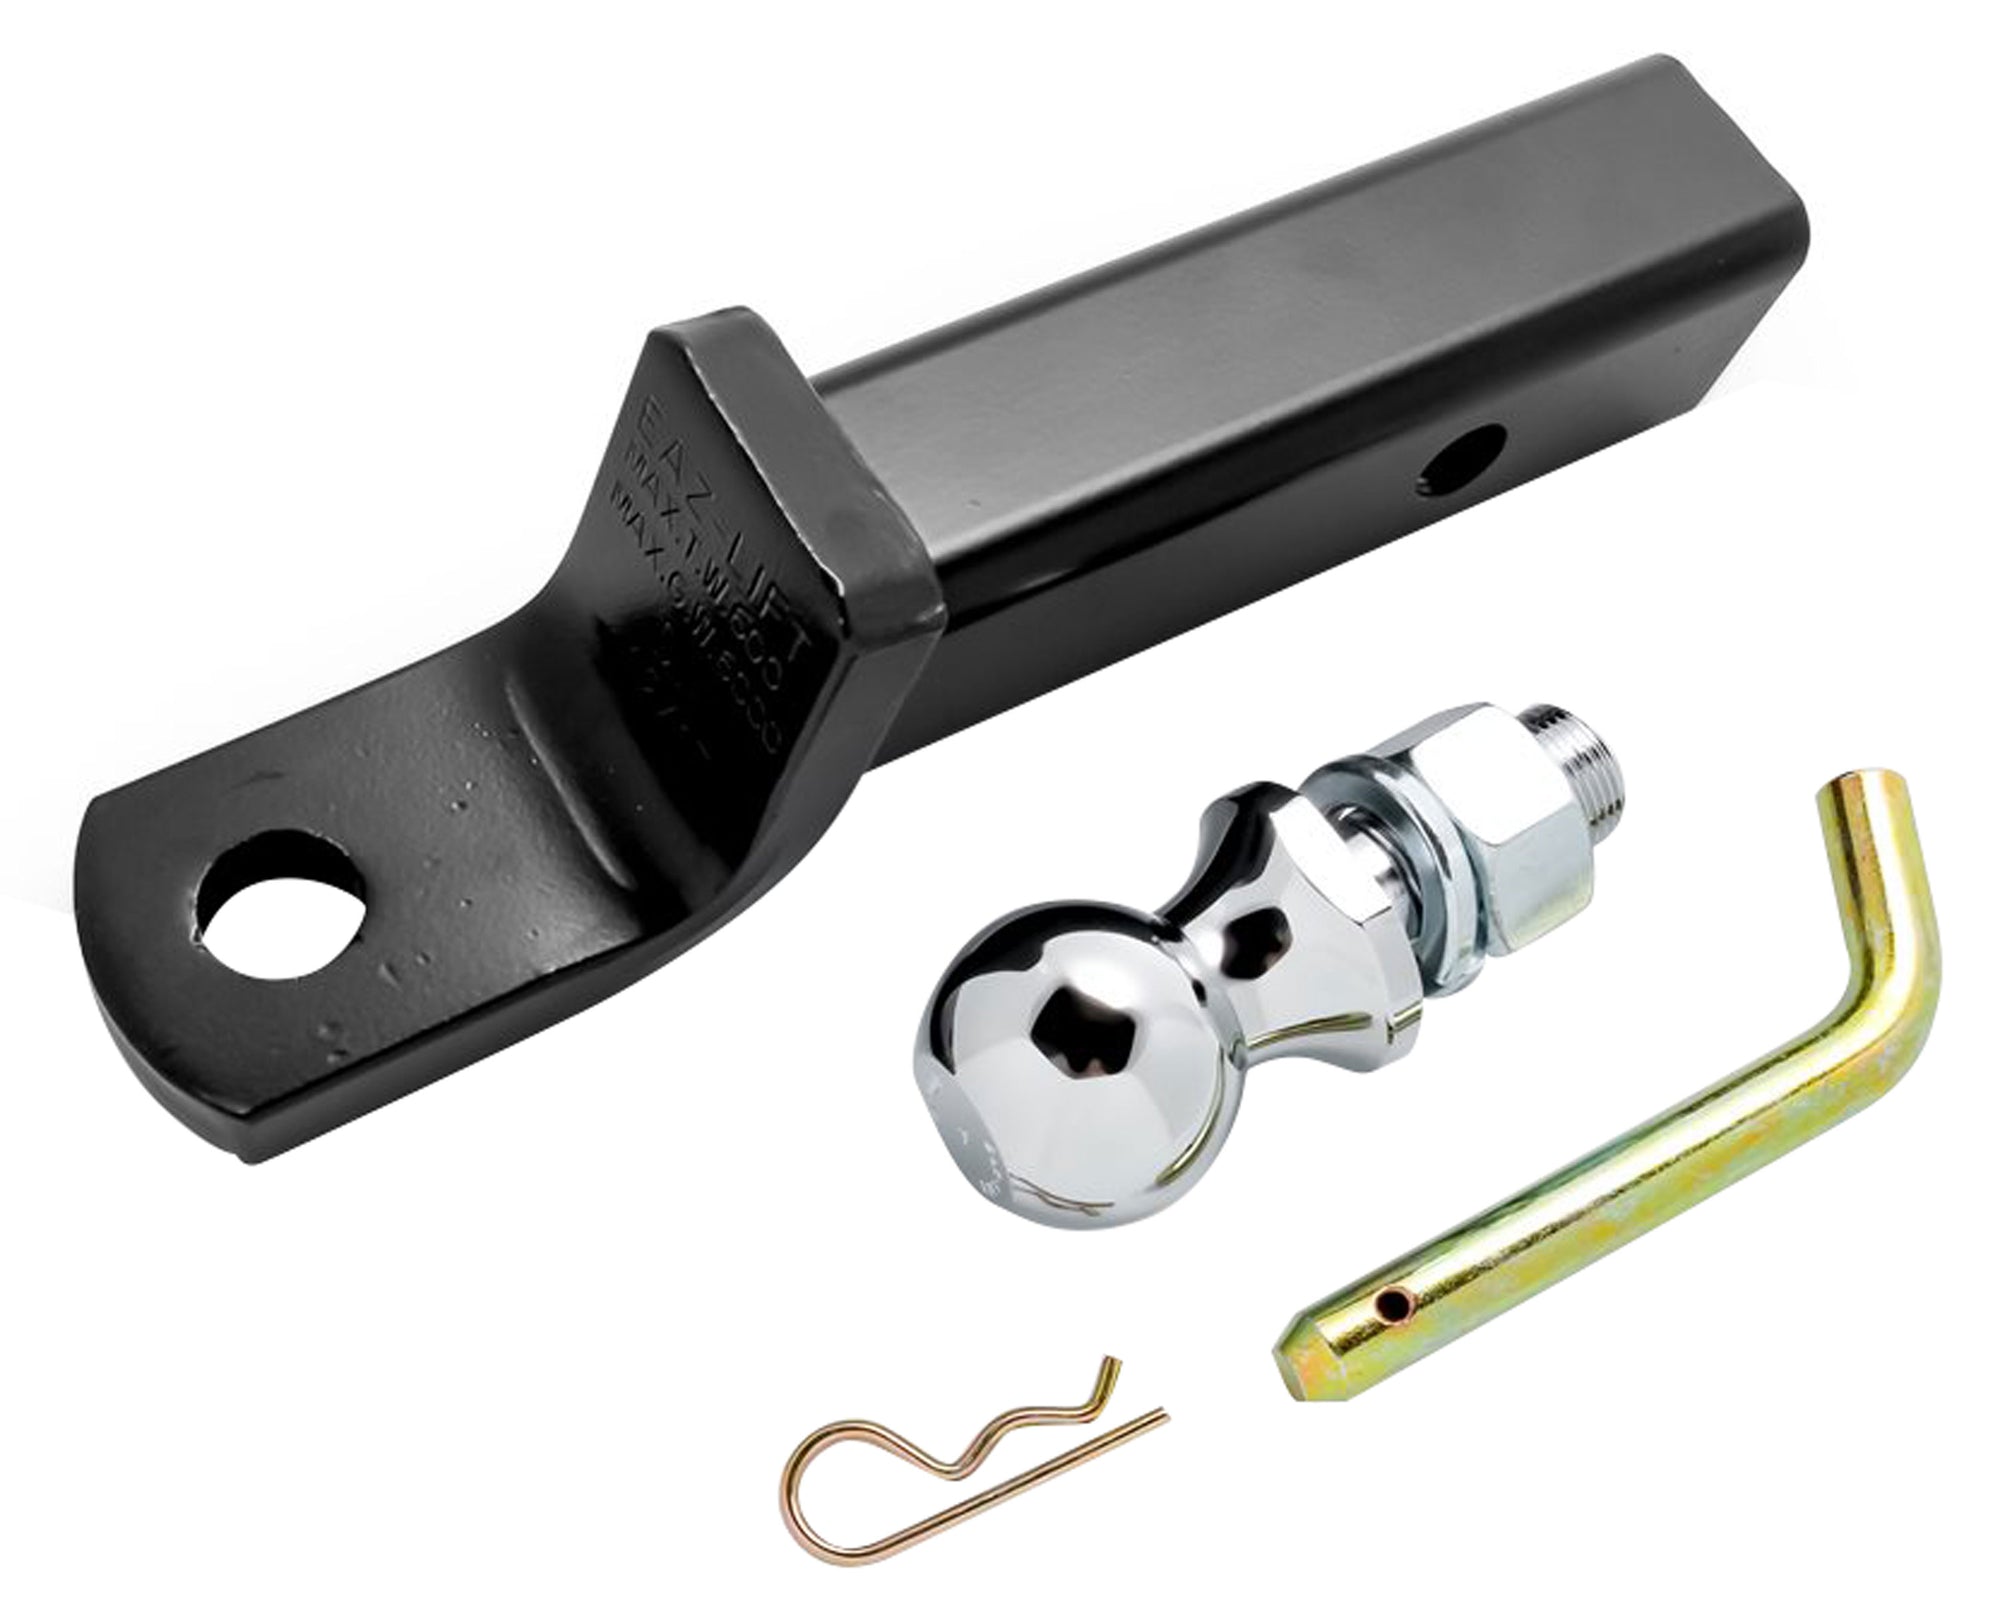 Camco 48274 Eaz-Lift Ball Mount Kit for 2" Hitch Receivers - 2" Ball (8" Length, 2" Drop, 0.75" Rise)